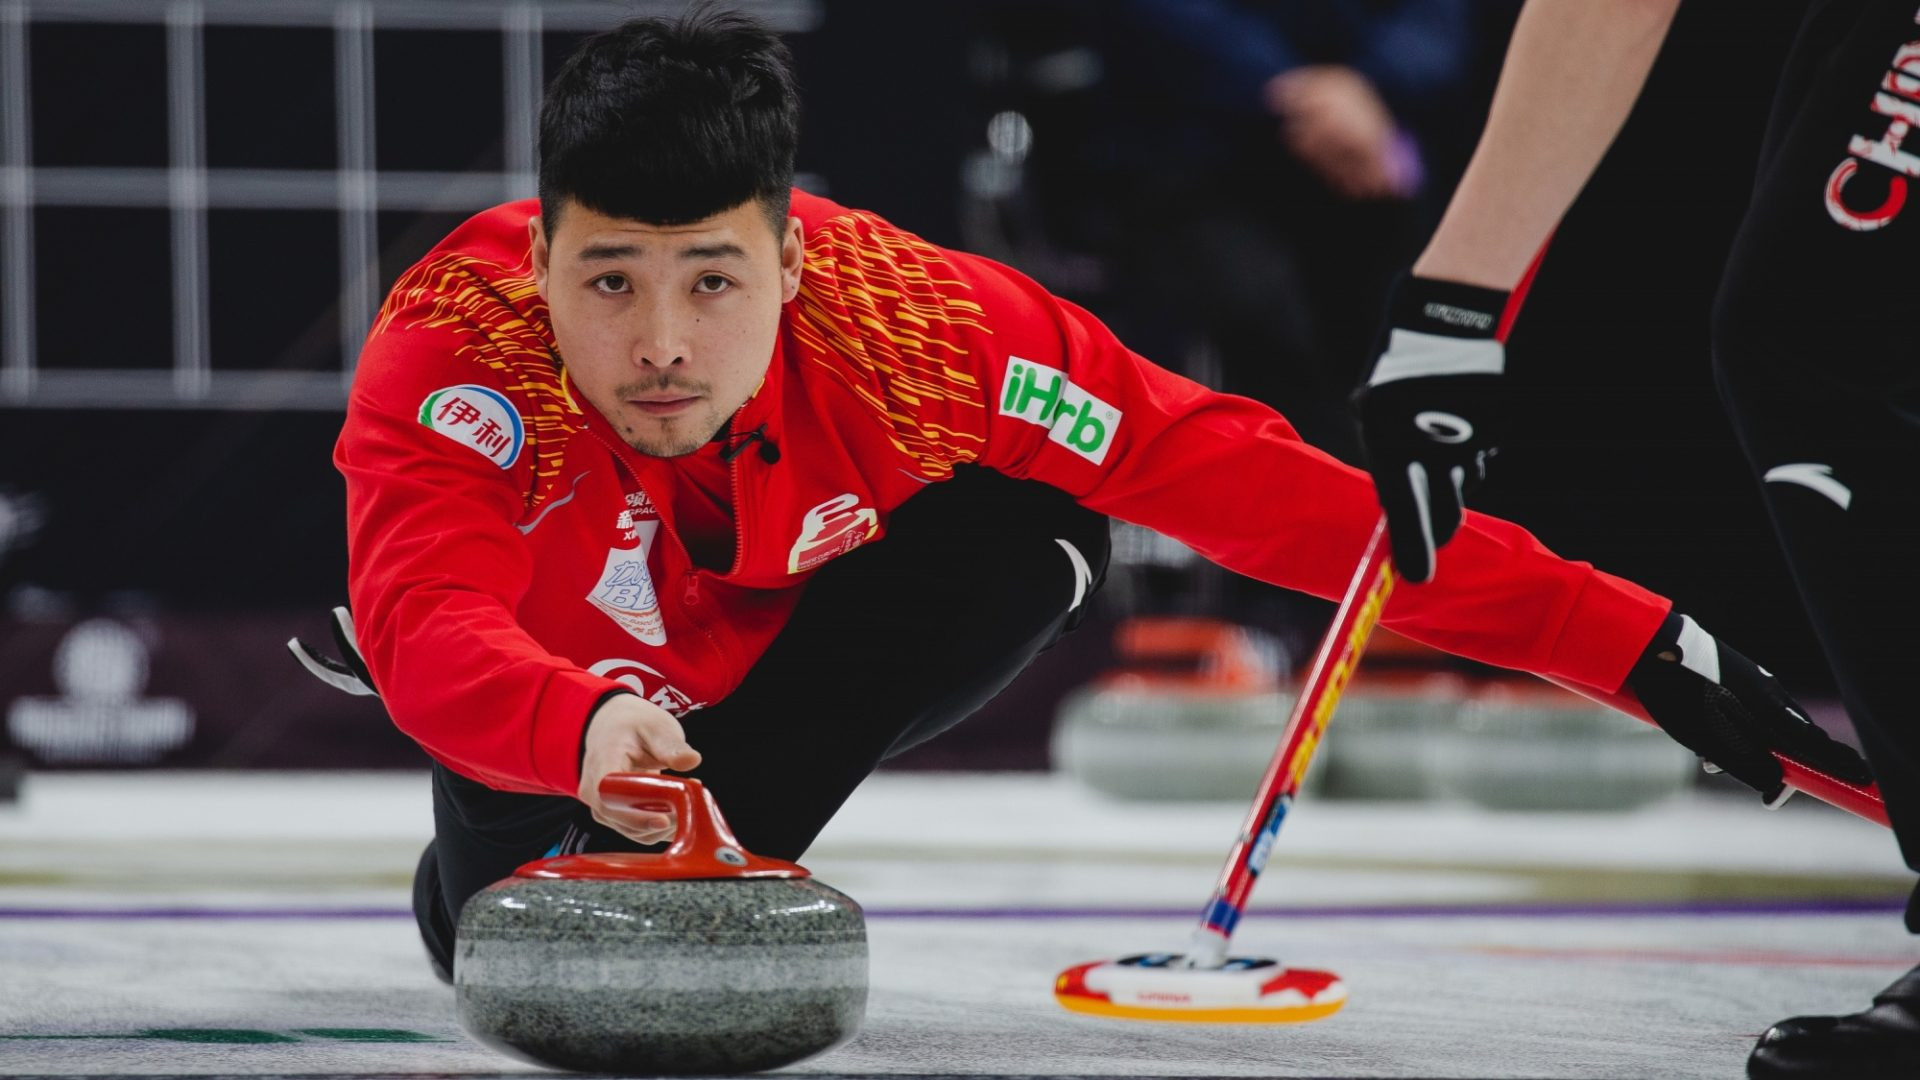 World champions defeated by hosts on opening day of Curling World Cup grand final in Beijing